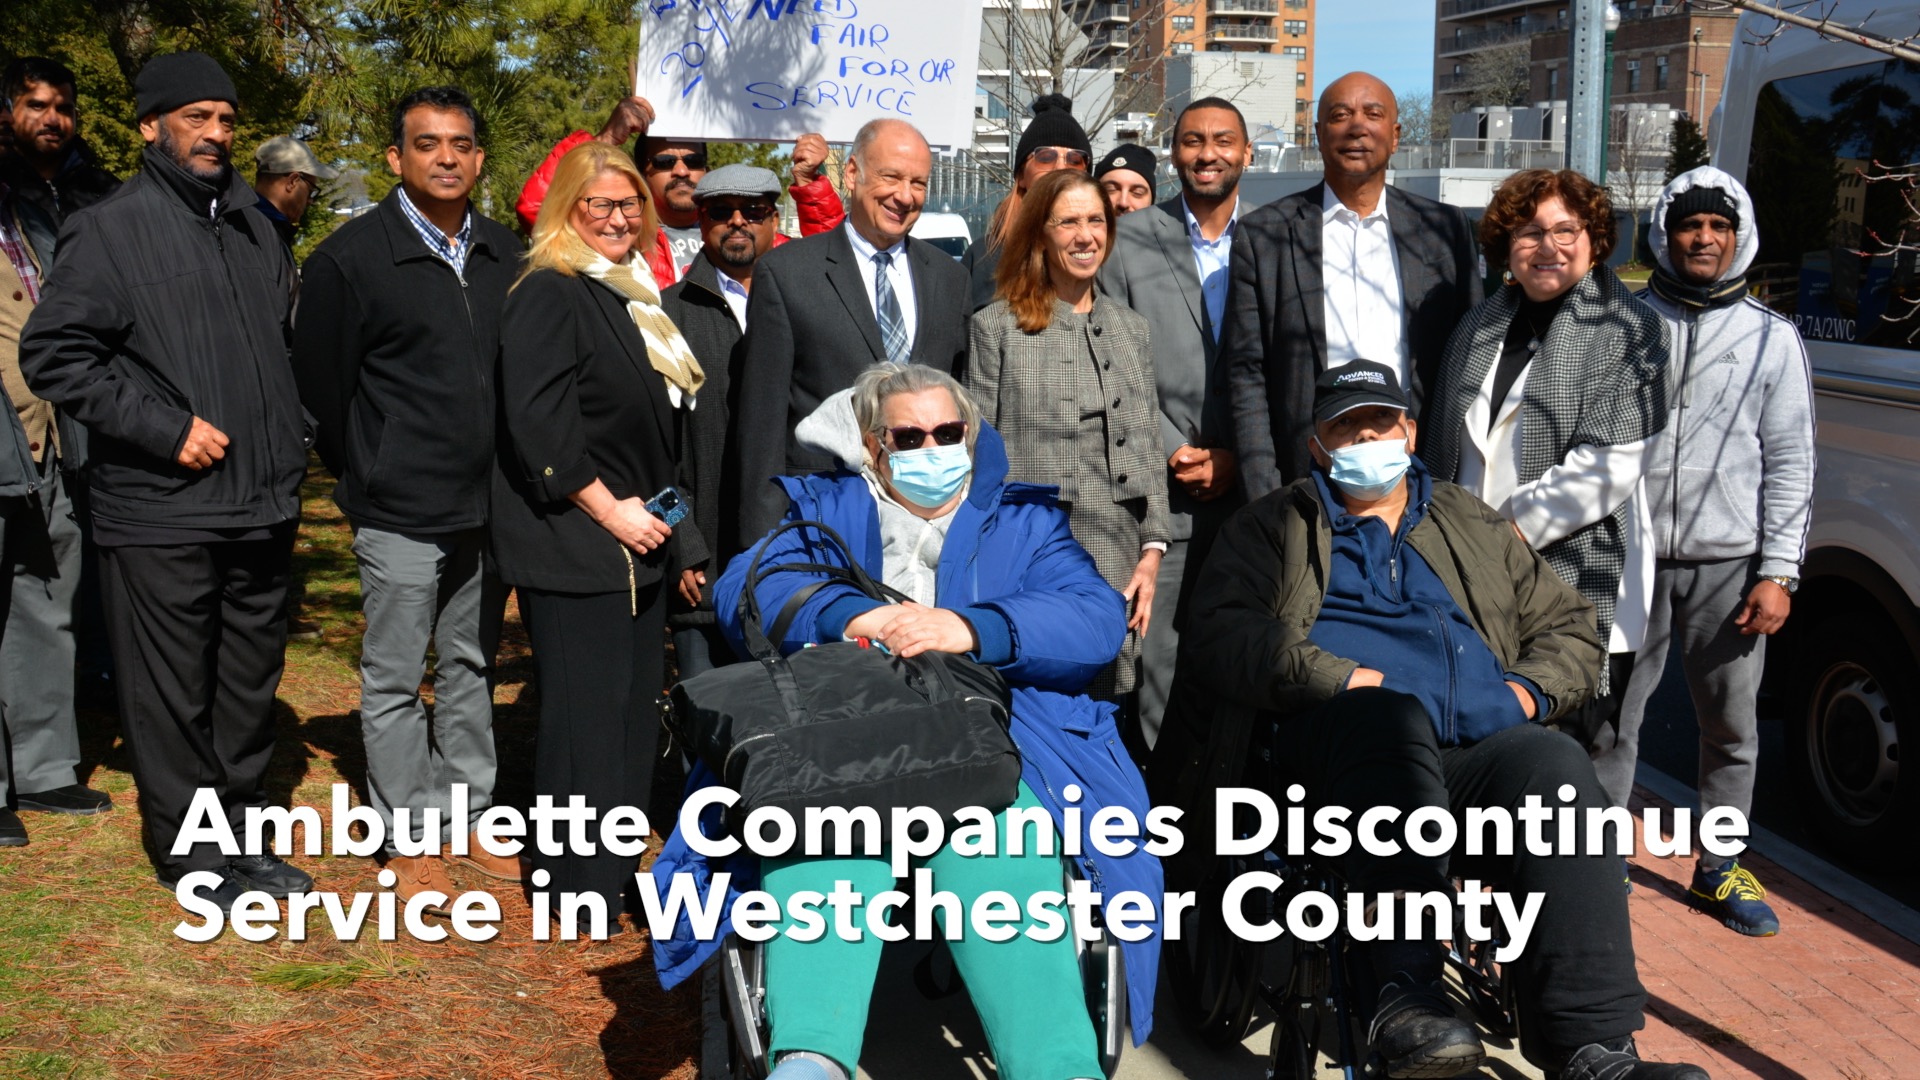 Ambulette Companies Discontinue Service in Westchester County